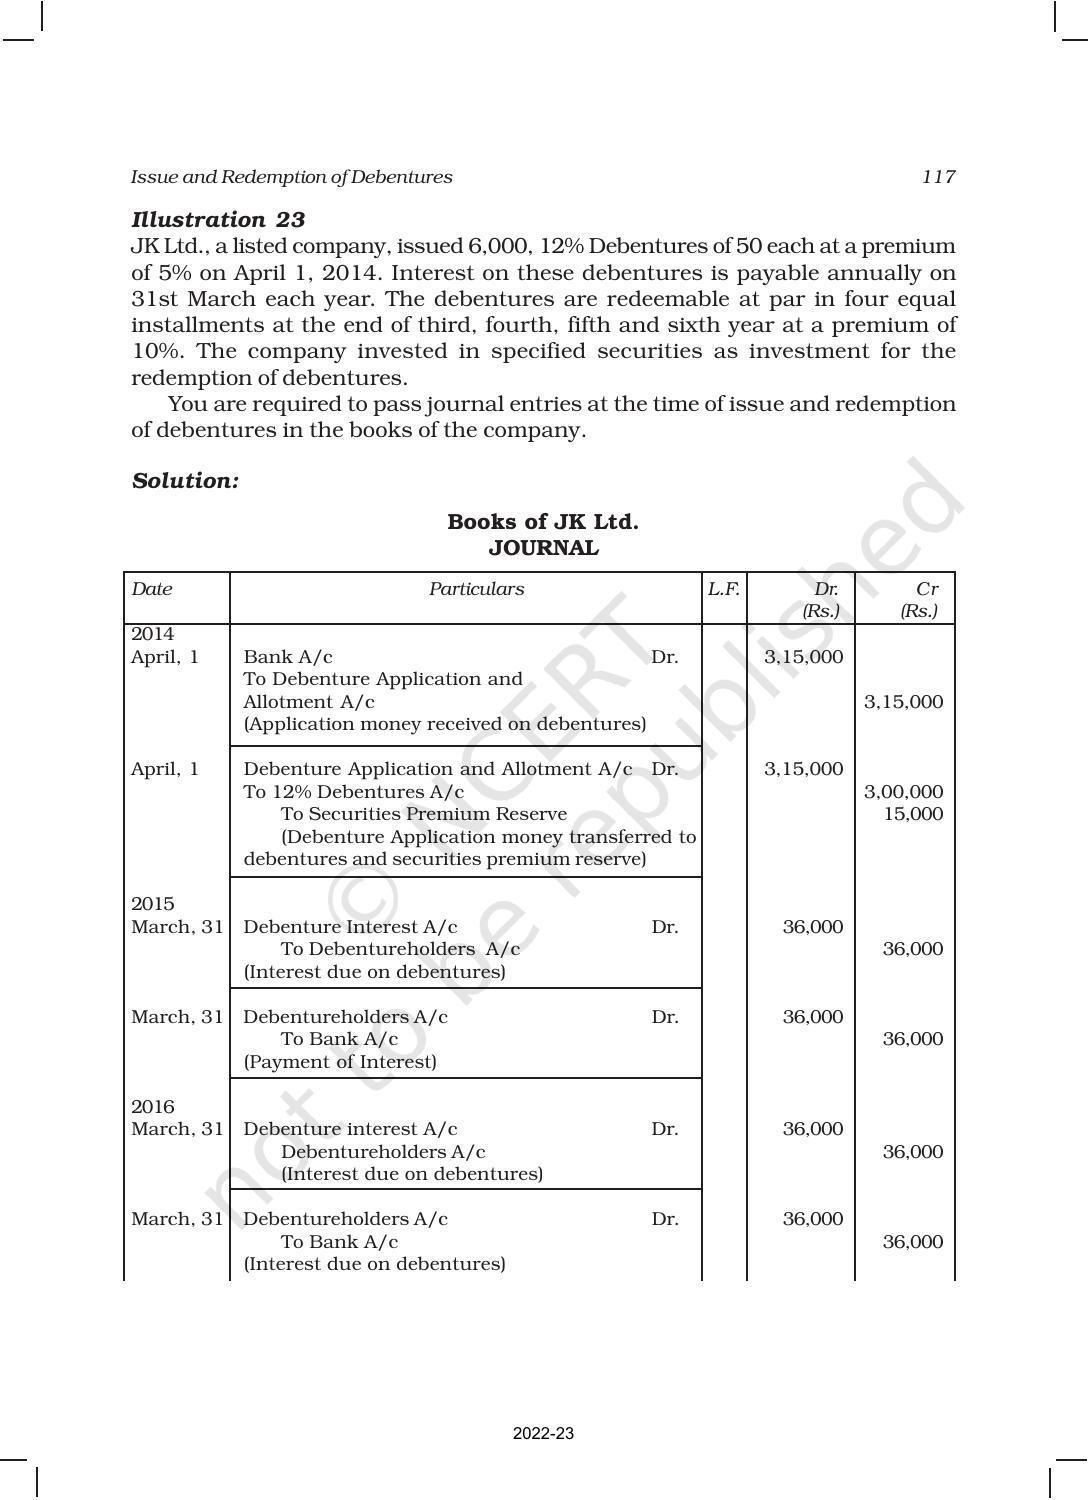 NCERT Book for Class 12 Accountancy Part II Chapter 1 Issue and Redemption of Debentures - Page 43